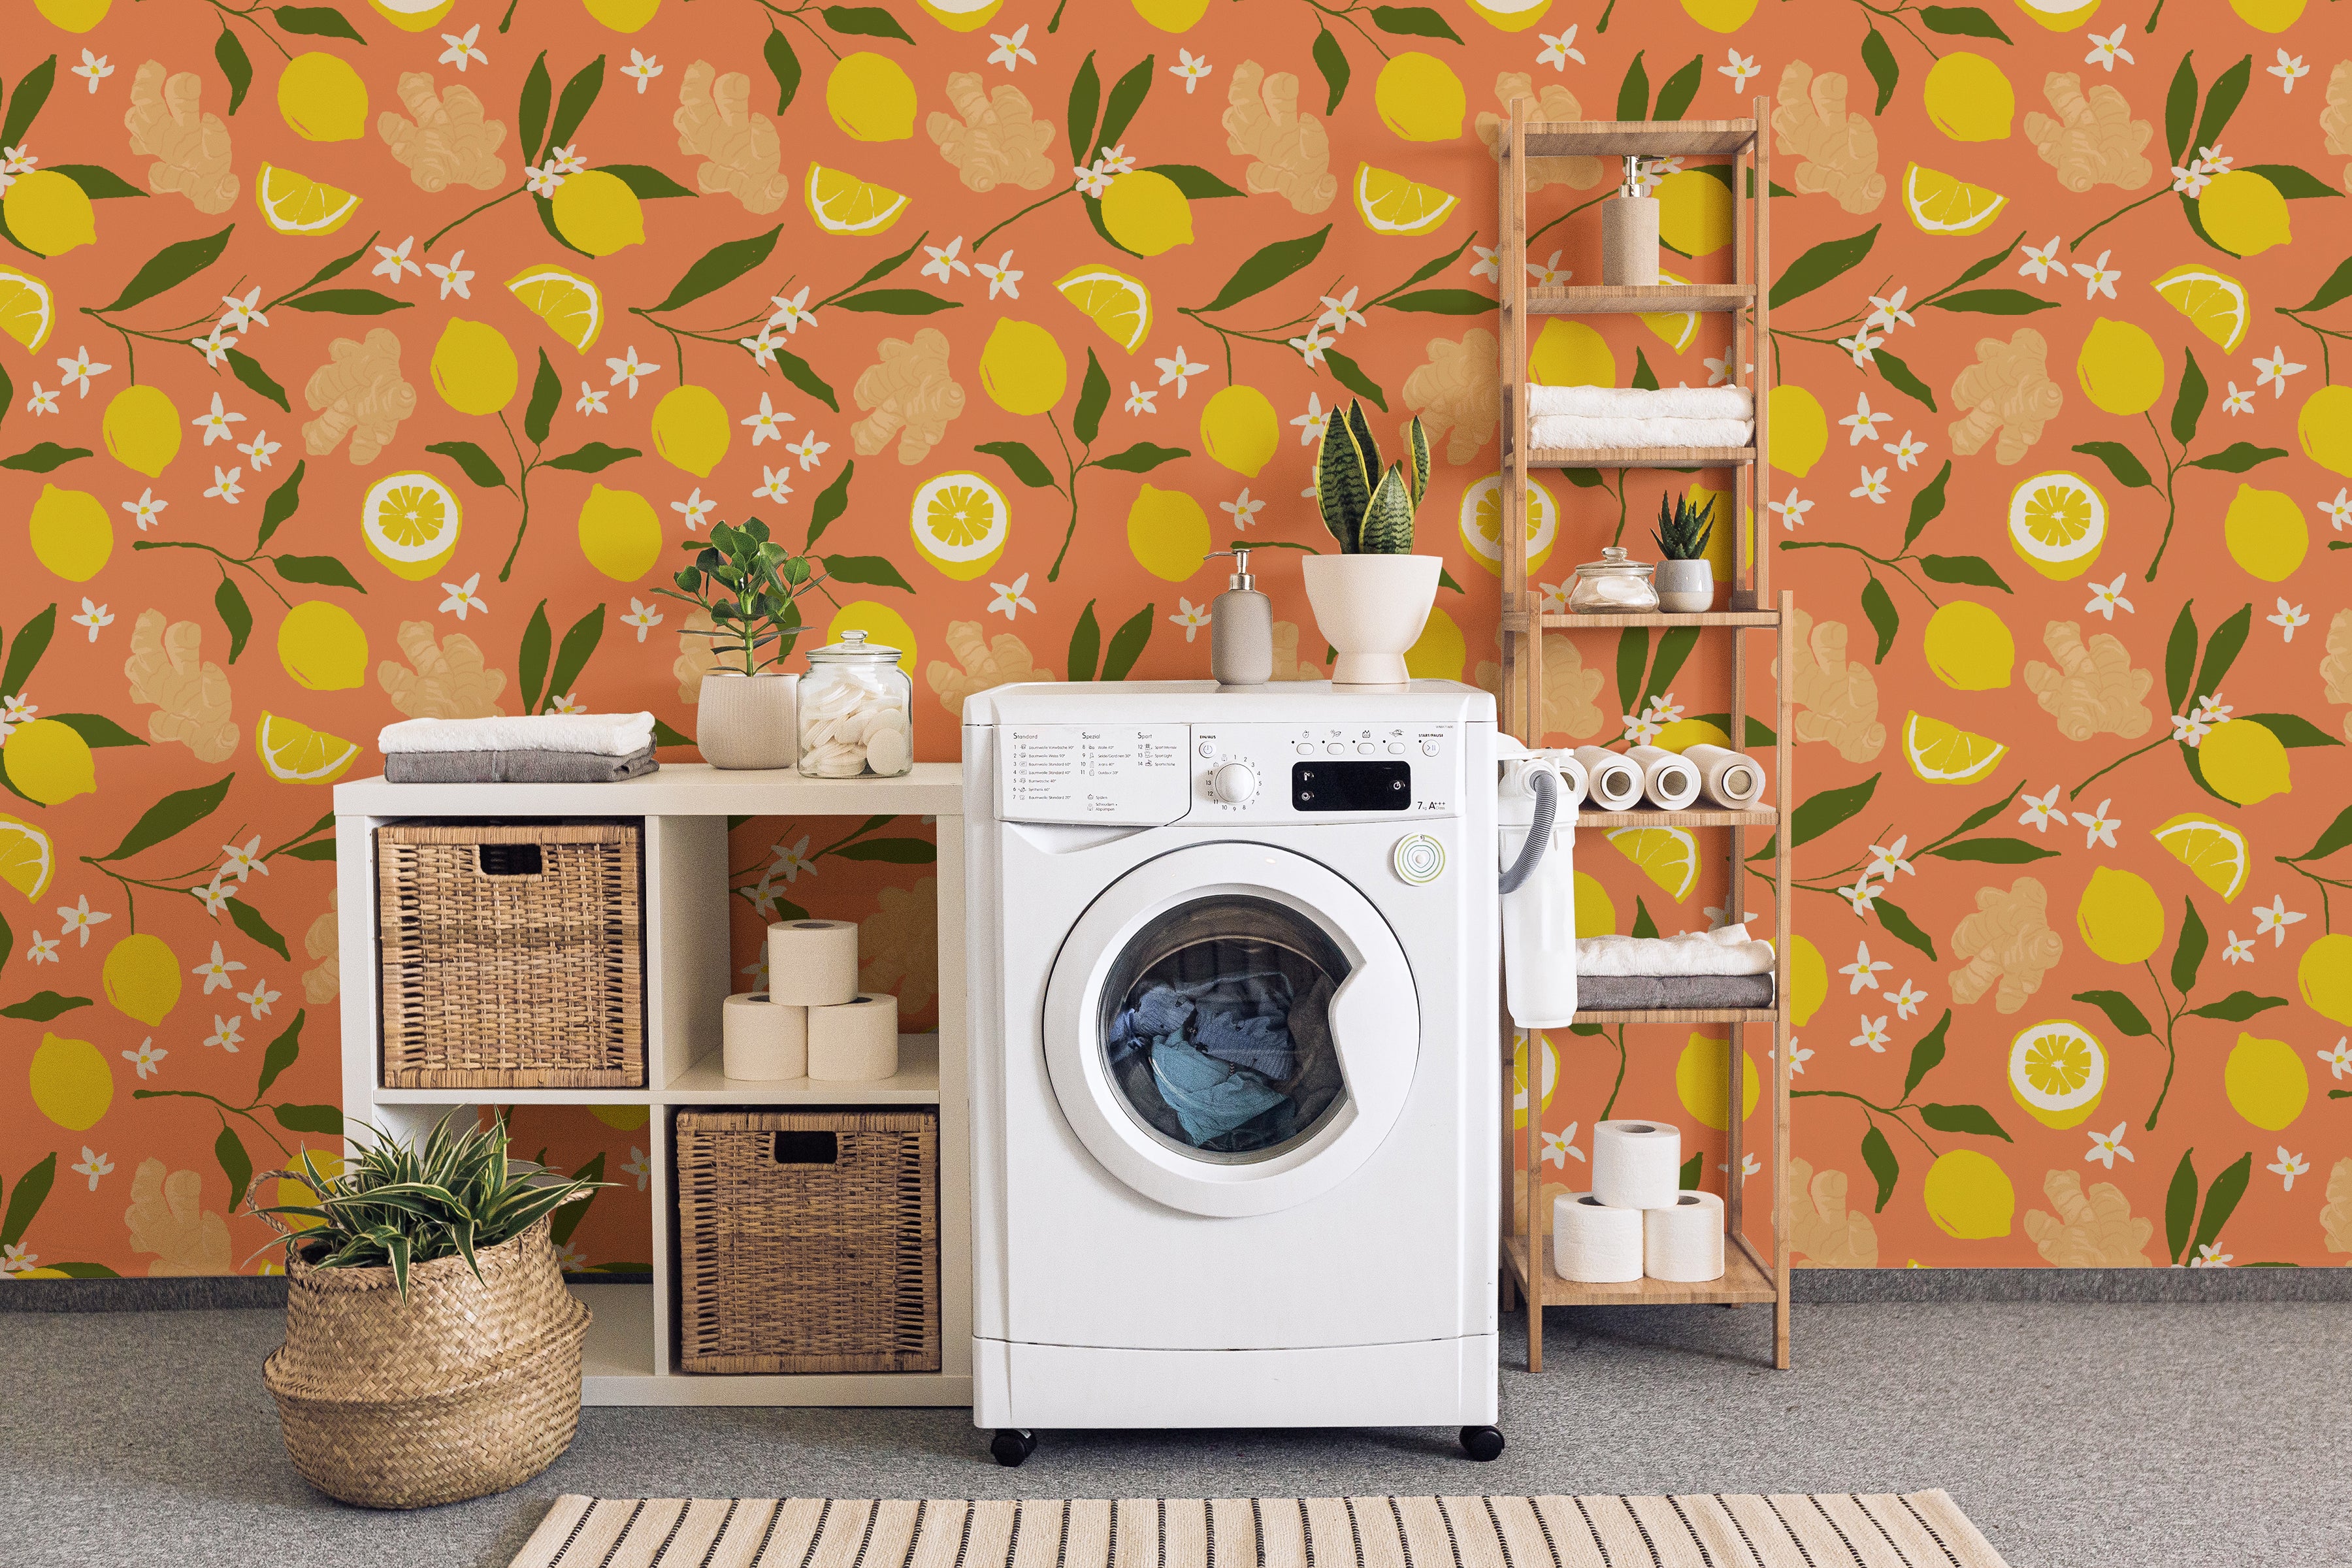 A vibrant laundry room featuring the Lemon Ginger Wallpaper, adorned with a pattern of yellow lemons, ginger flowers, and small white blossoms set against a rich orange backdrop. The scene includes a white washing machine, woven baskets, and wooden shelves filled with laundry essentials and decorative plants, creating a cheerful and functional space.